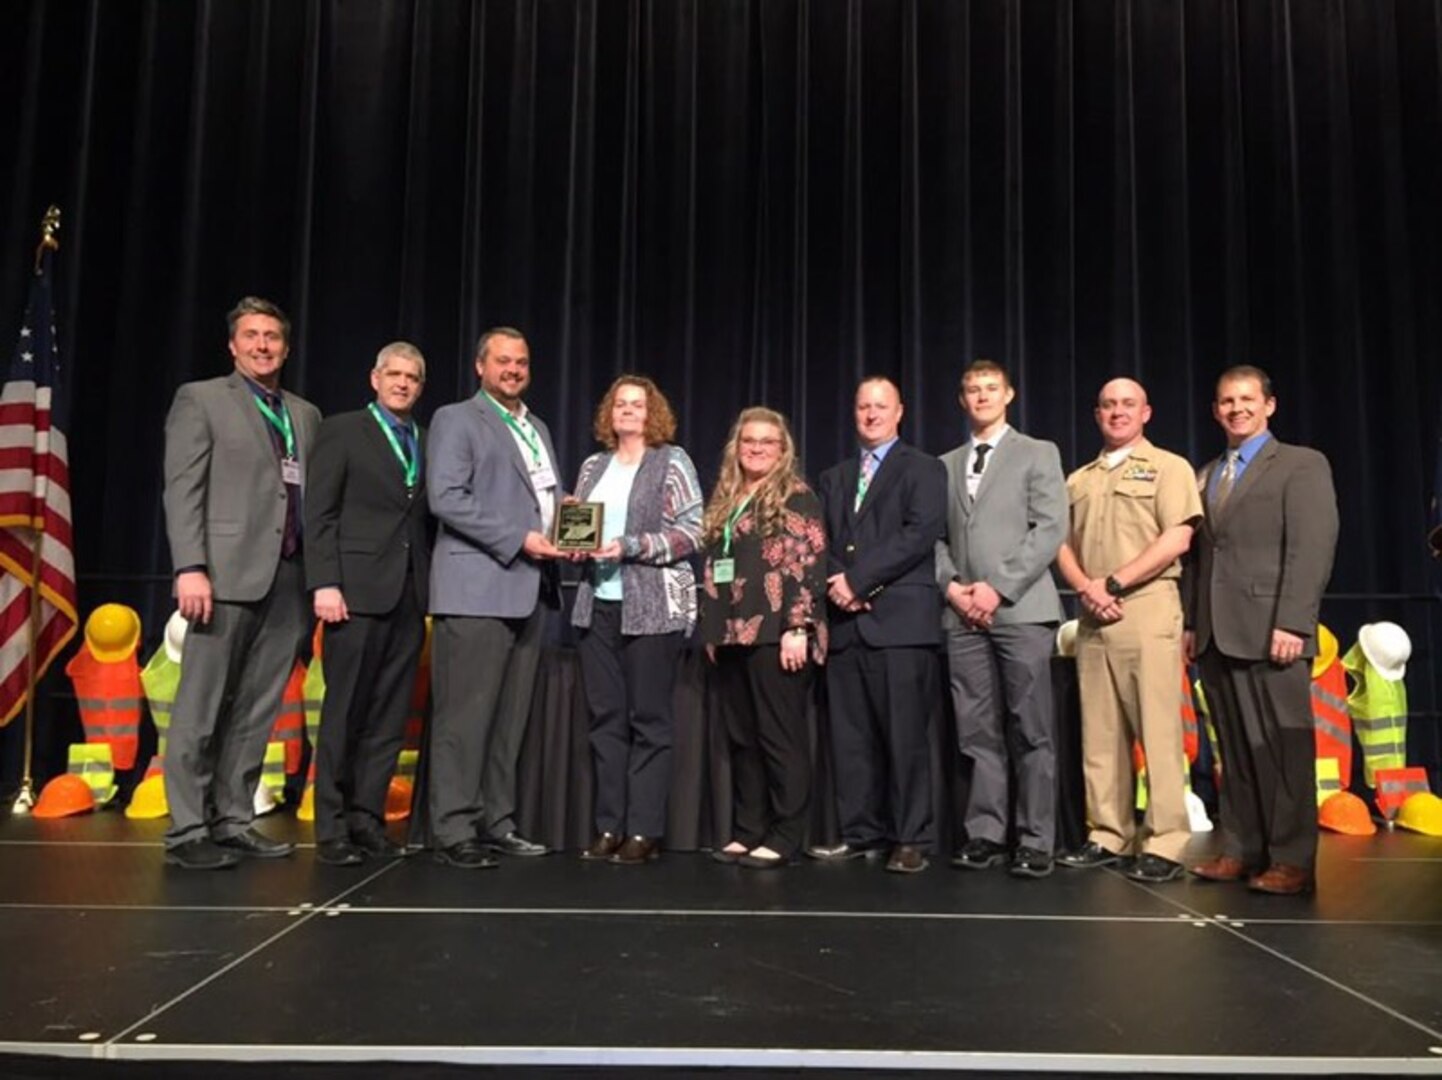 Naval Surface Warfare Center, Crane Division (NSWC Crane) was recognized with the Governor’s Workplace Safety “Rising Star” Award at the 2019 Indiana Safety and Health Conference & Expo Thursday, February 28 in Indianapolis.